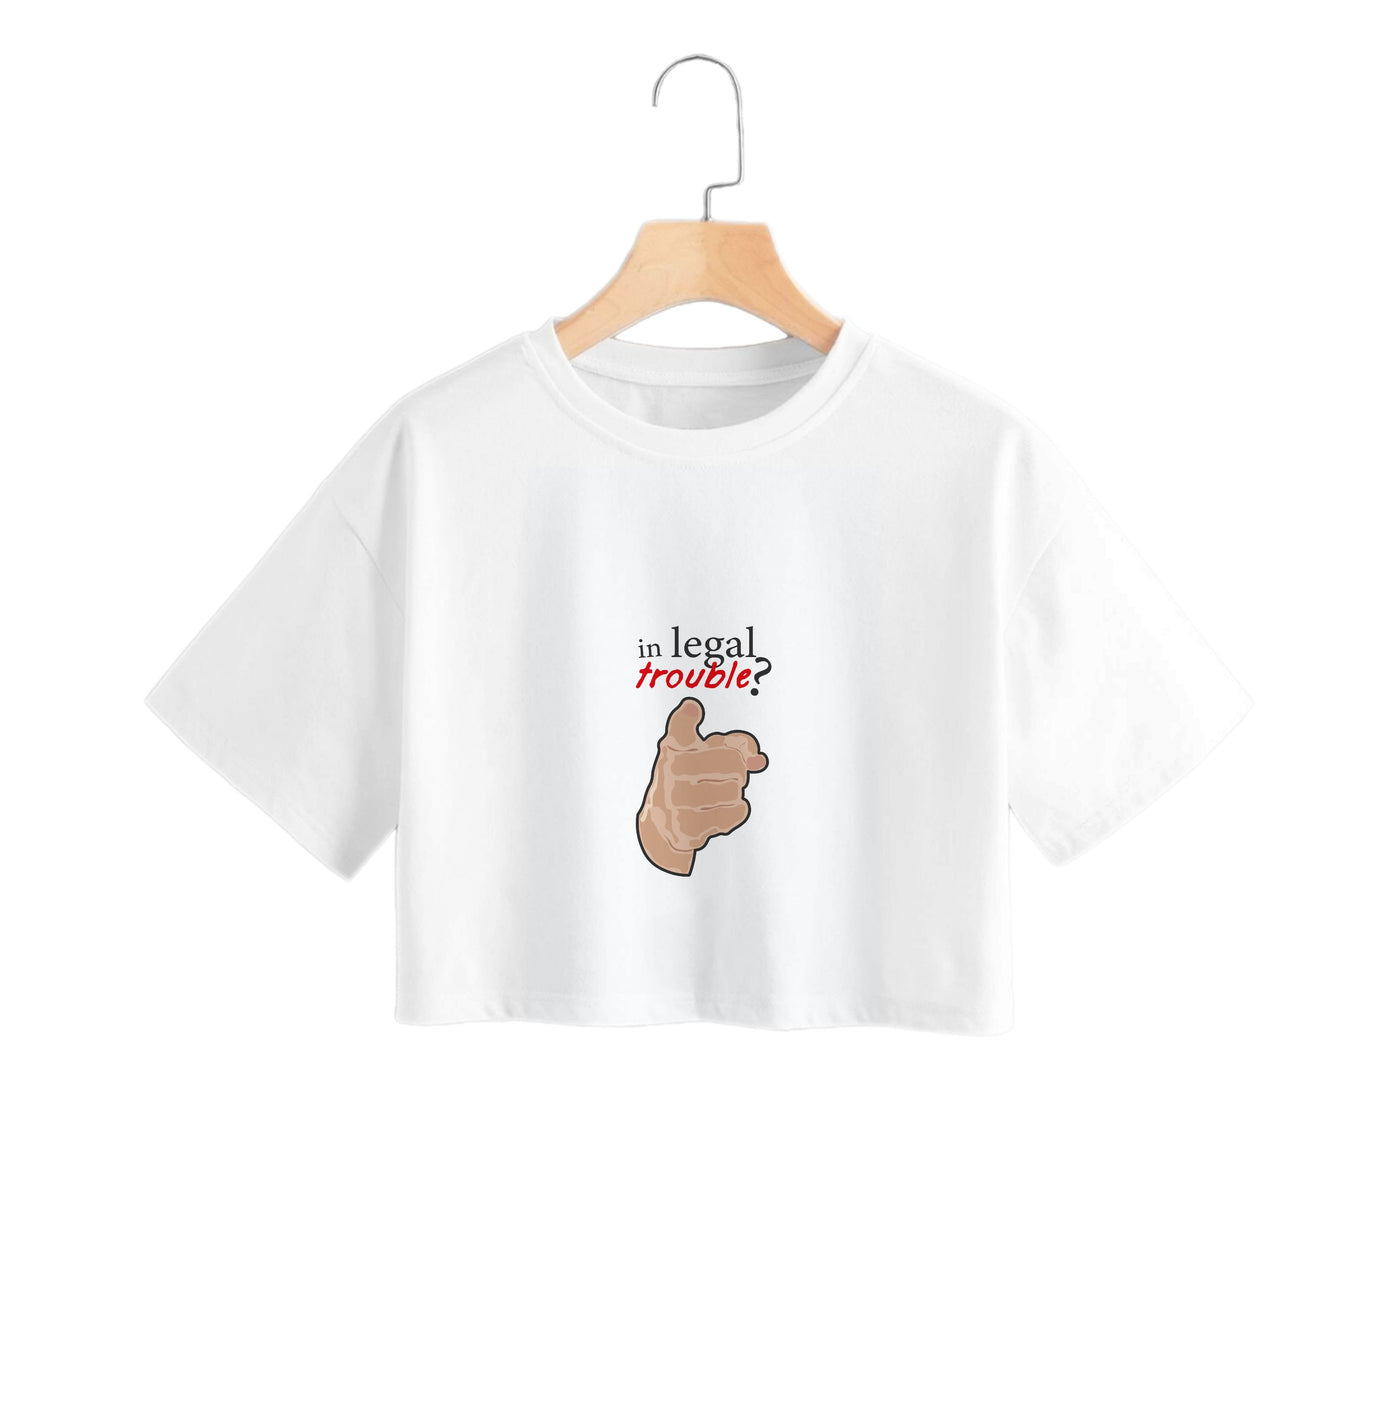 In Legal Trouble? - Better Call Saul Crop Top